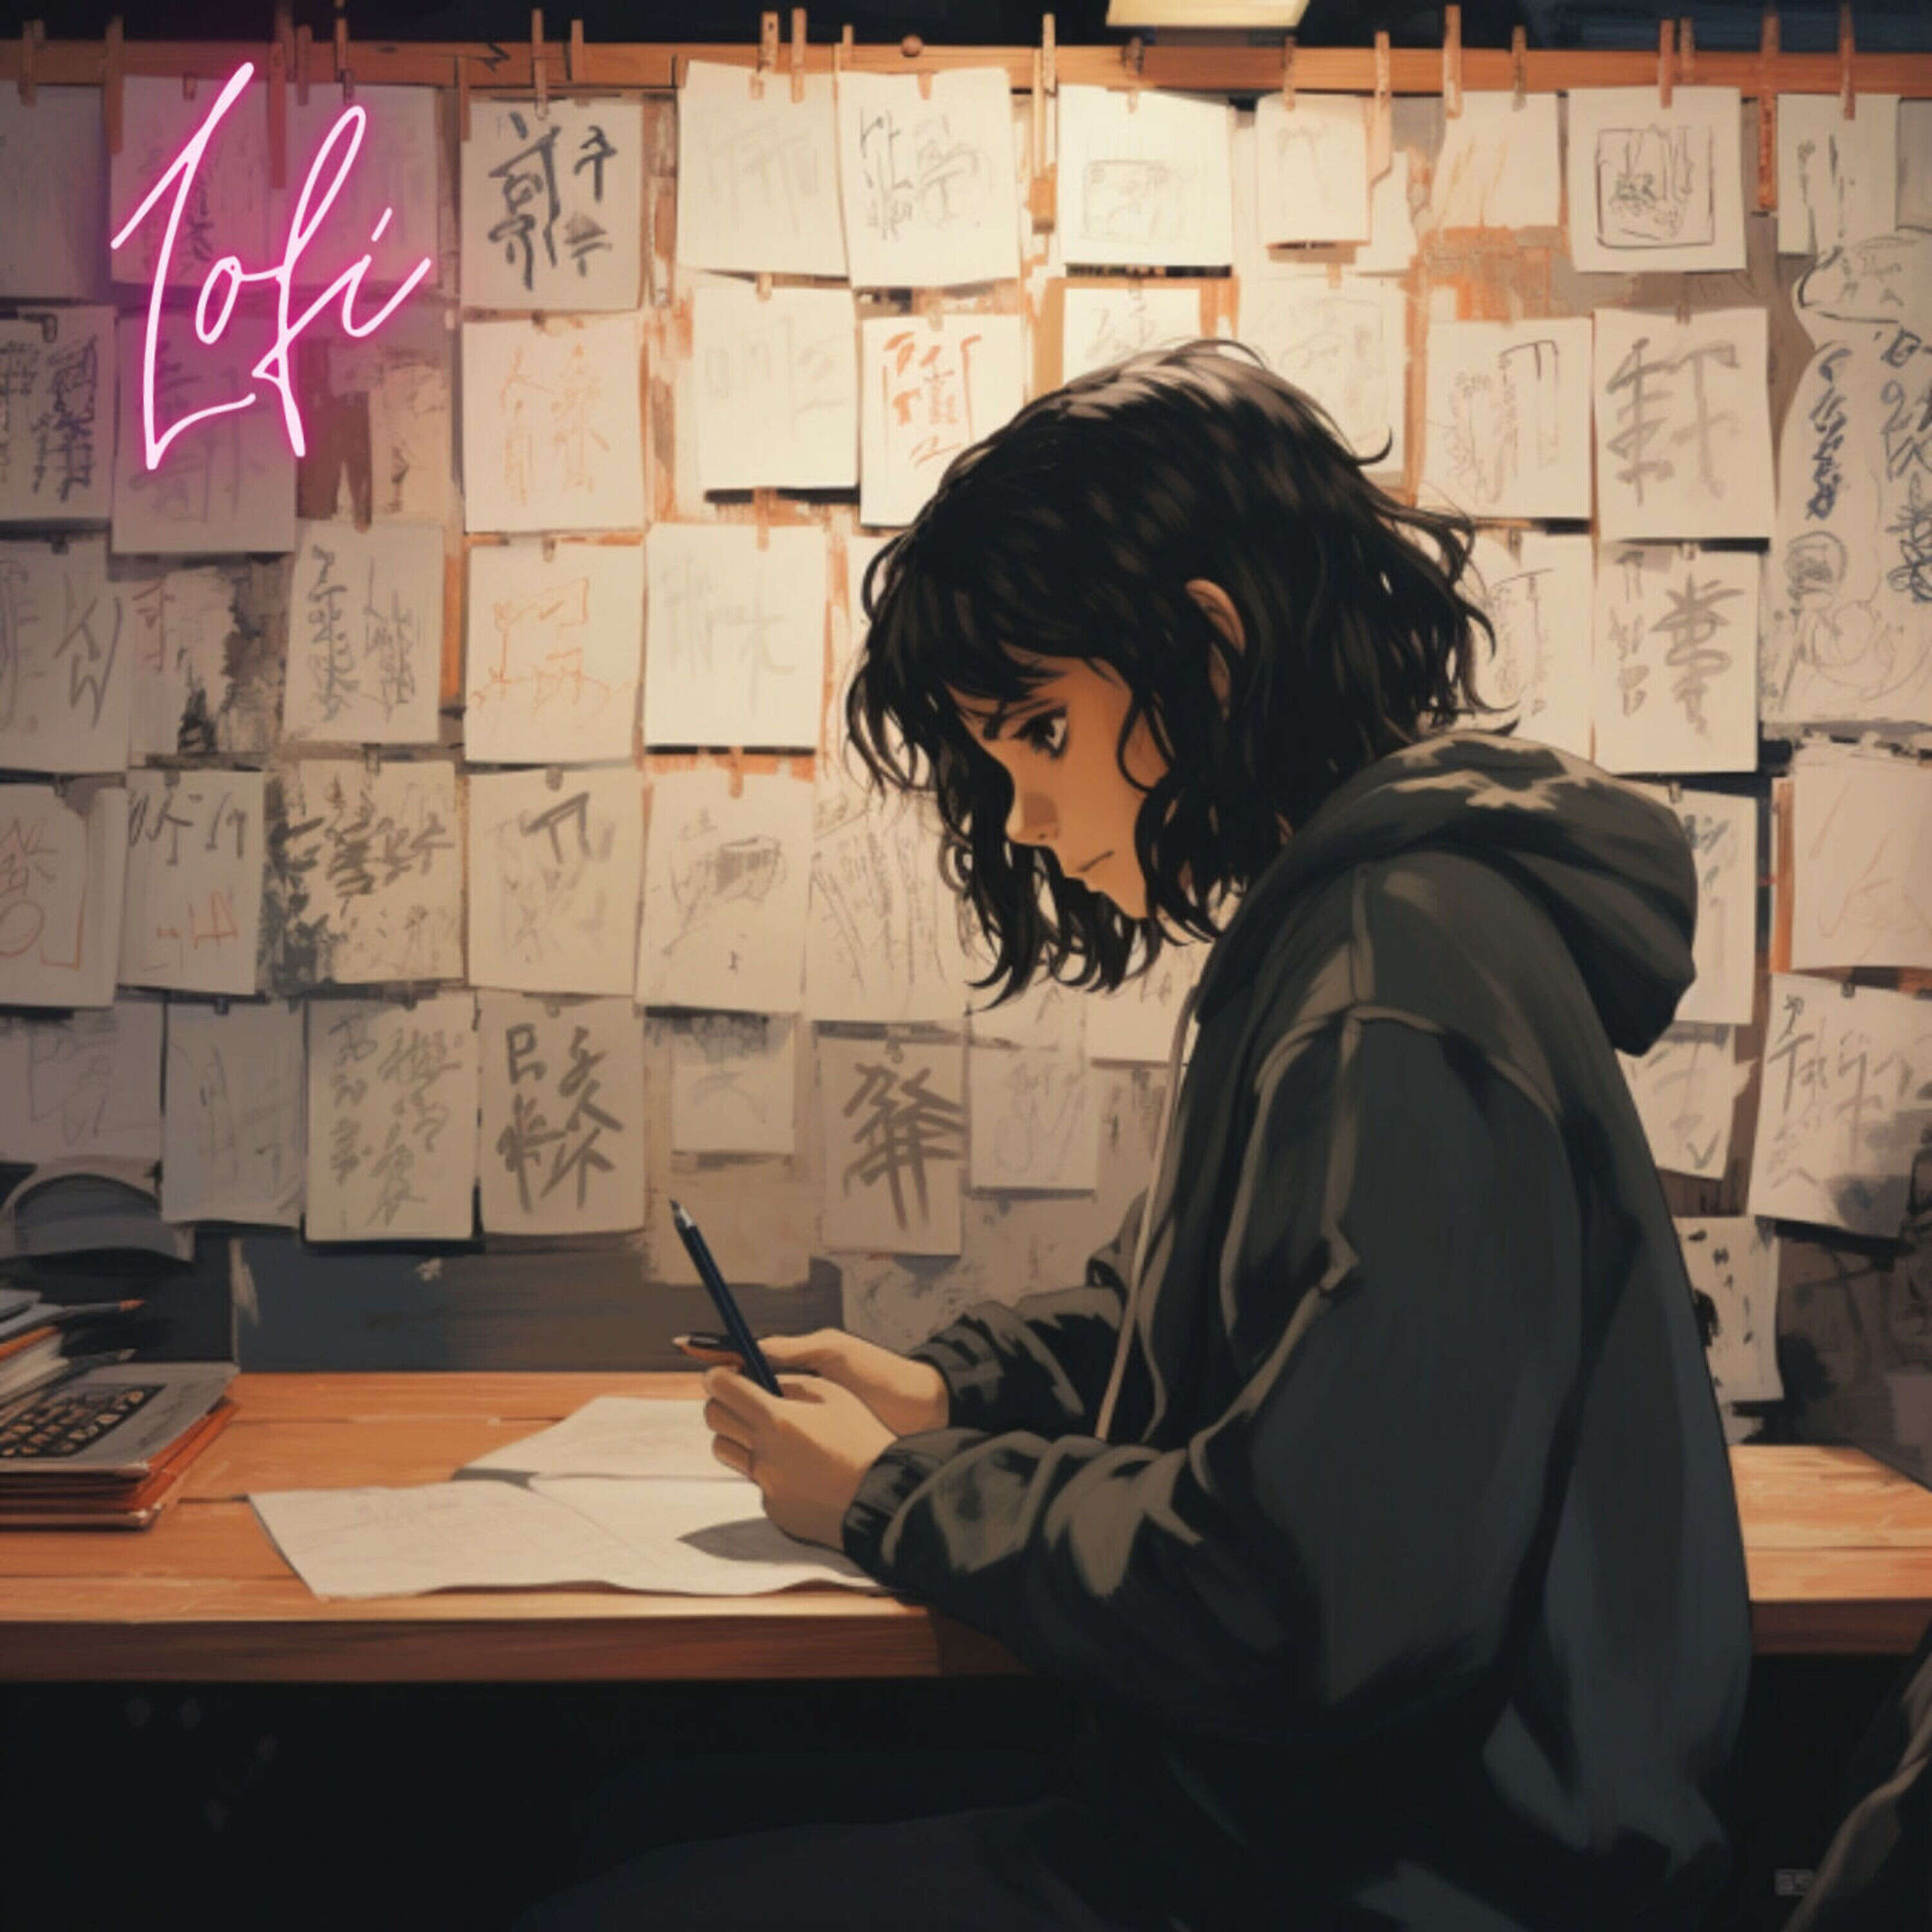 Immersed in Lofi: A Musical Odyssey through the Melancholic and Mellow